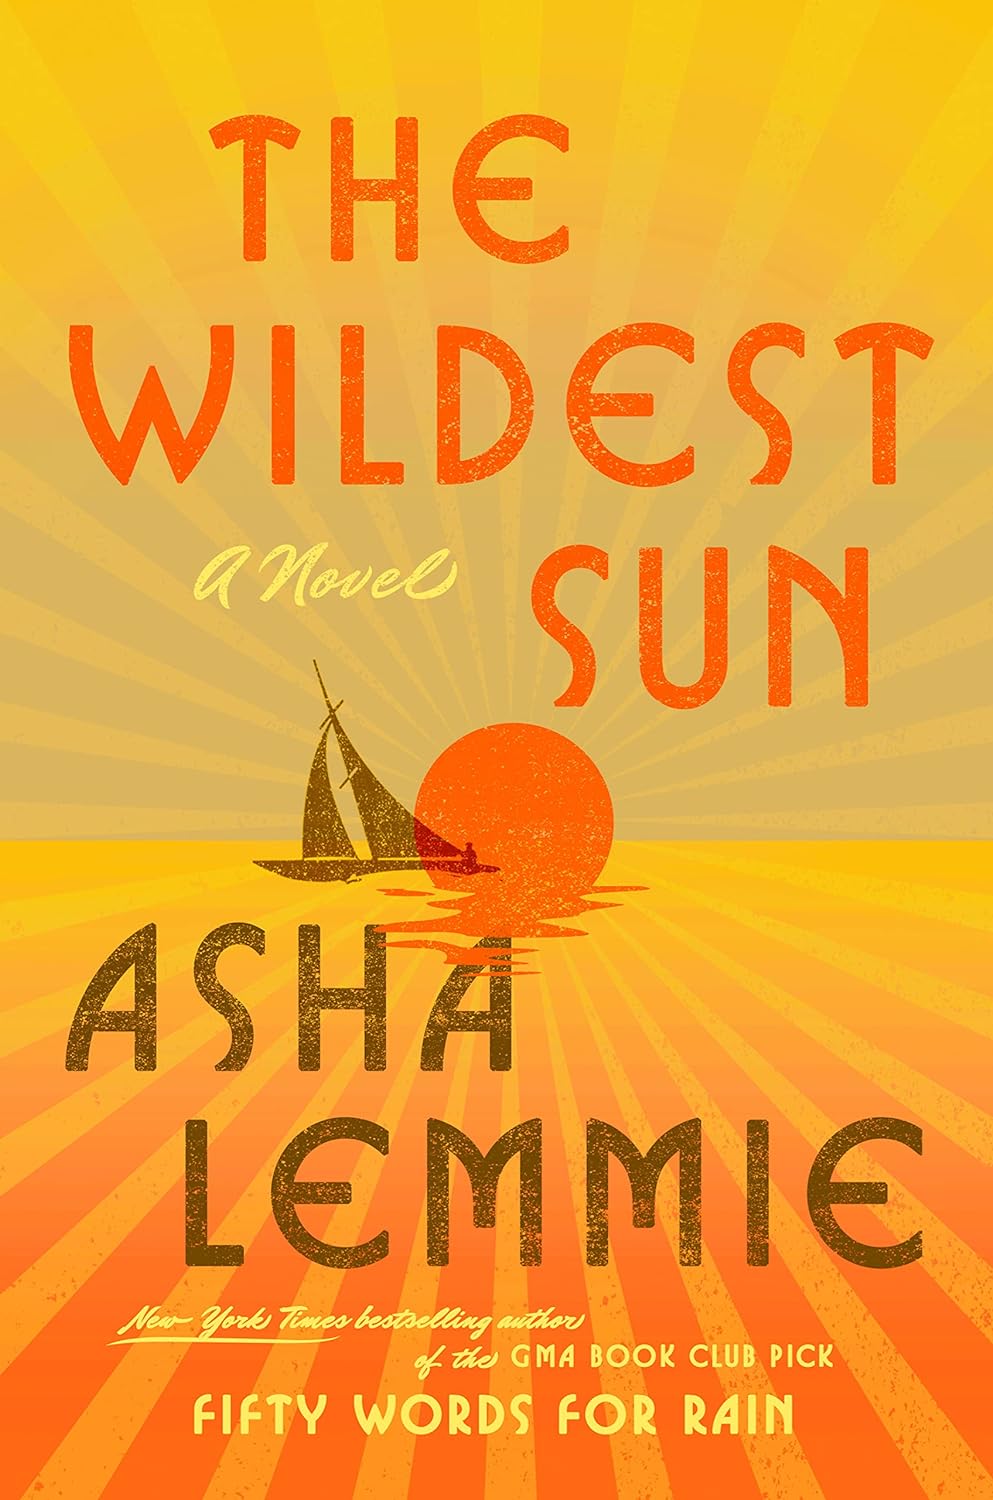 Image for "The Wildest Sun"